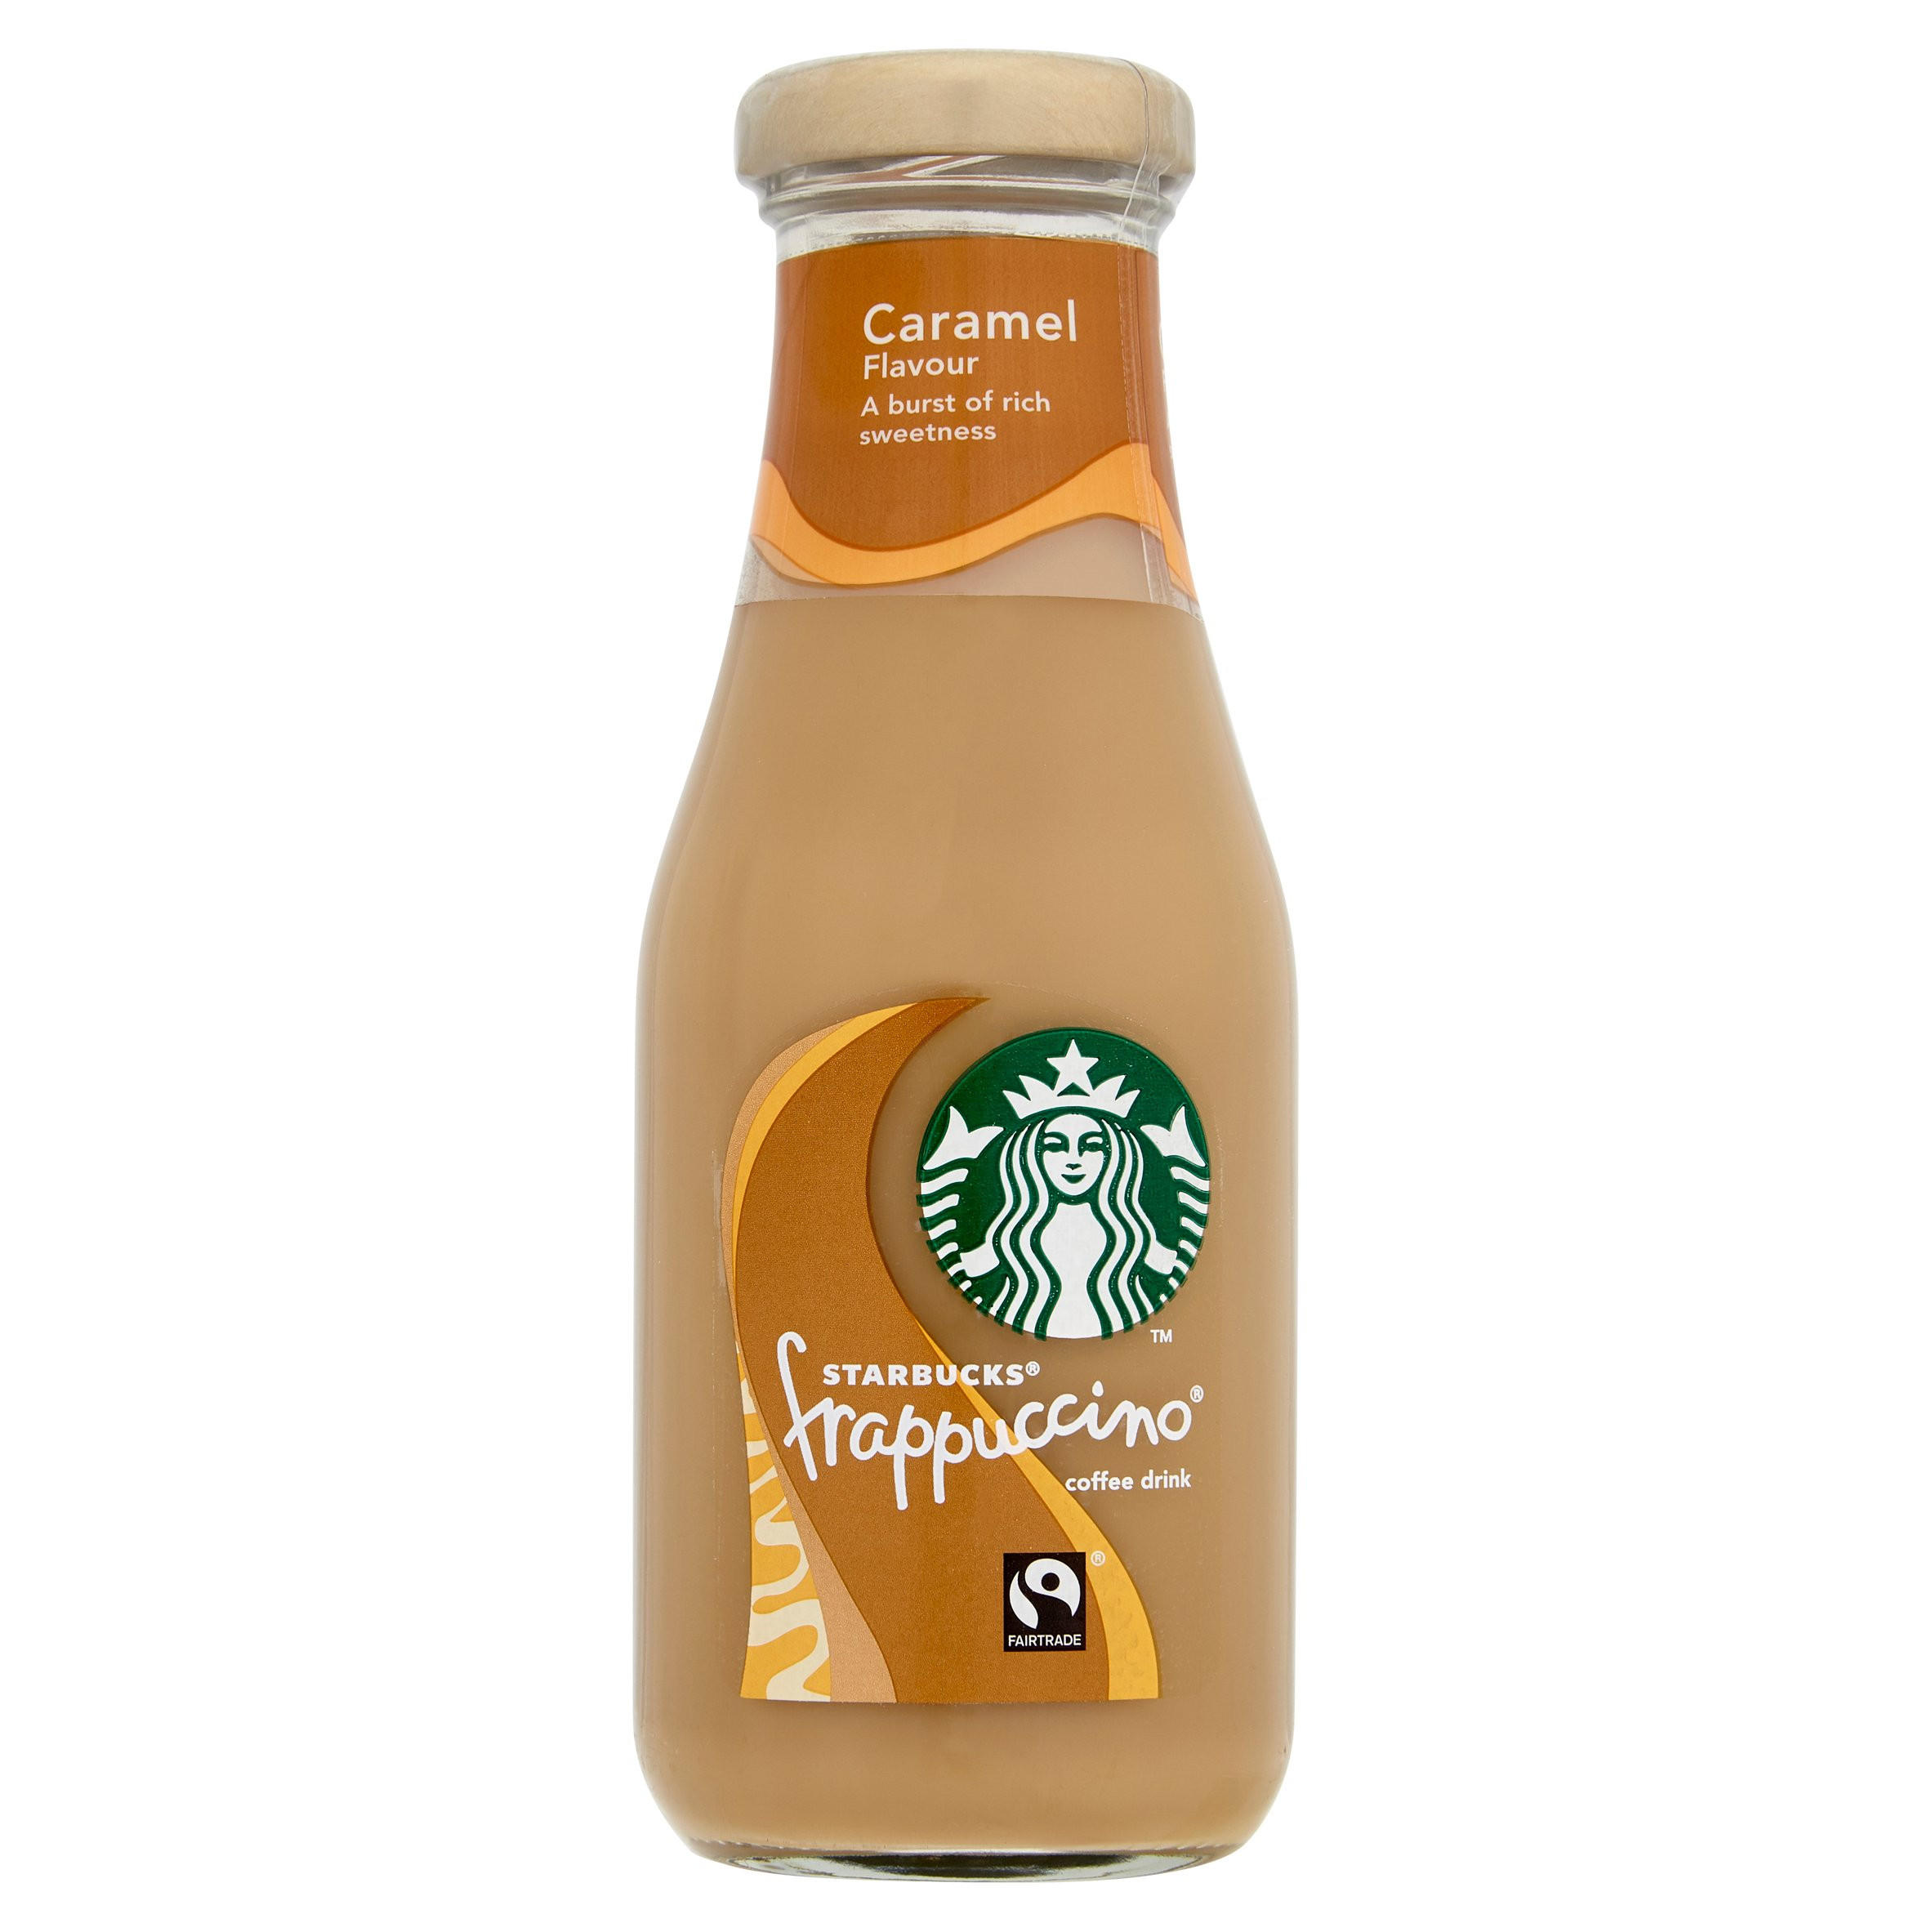 flavoured frappuccino 250ml caramel